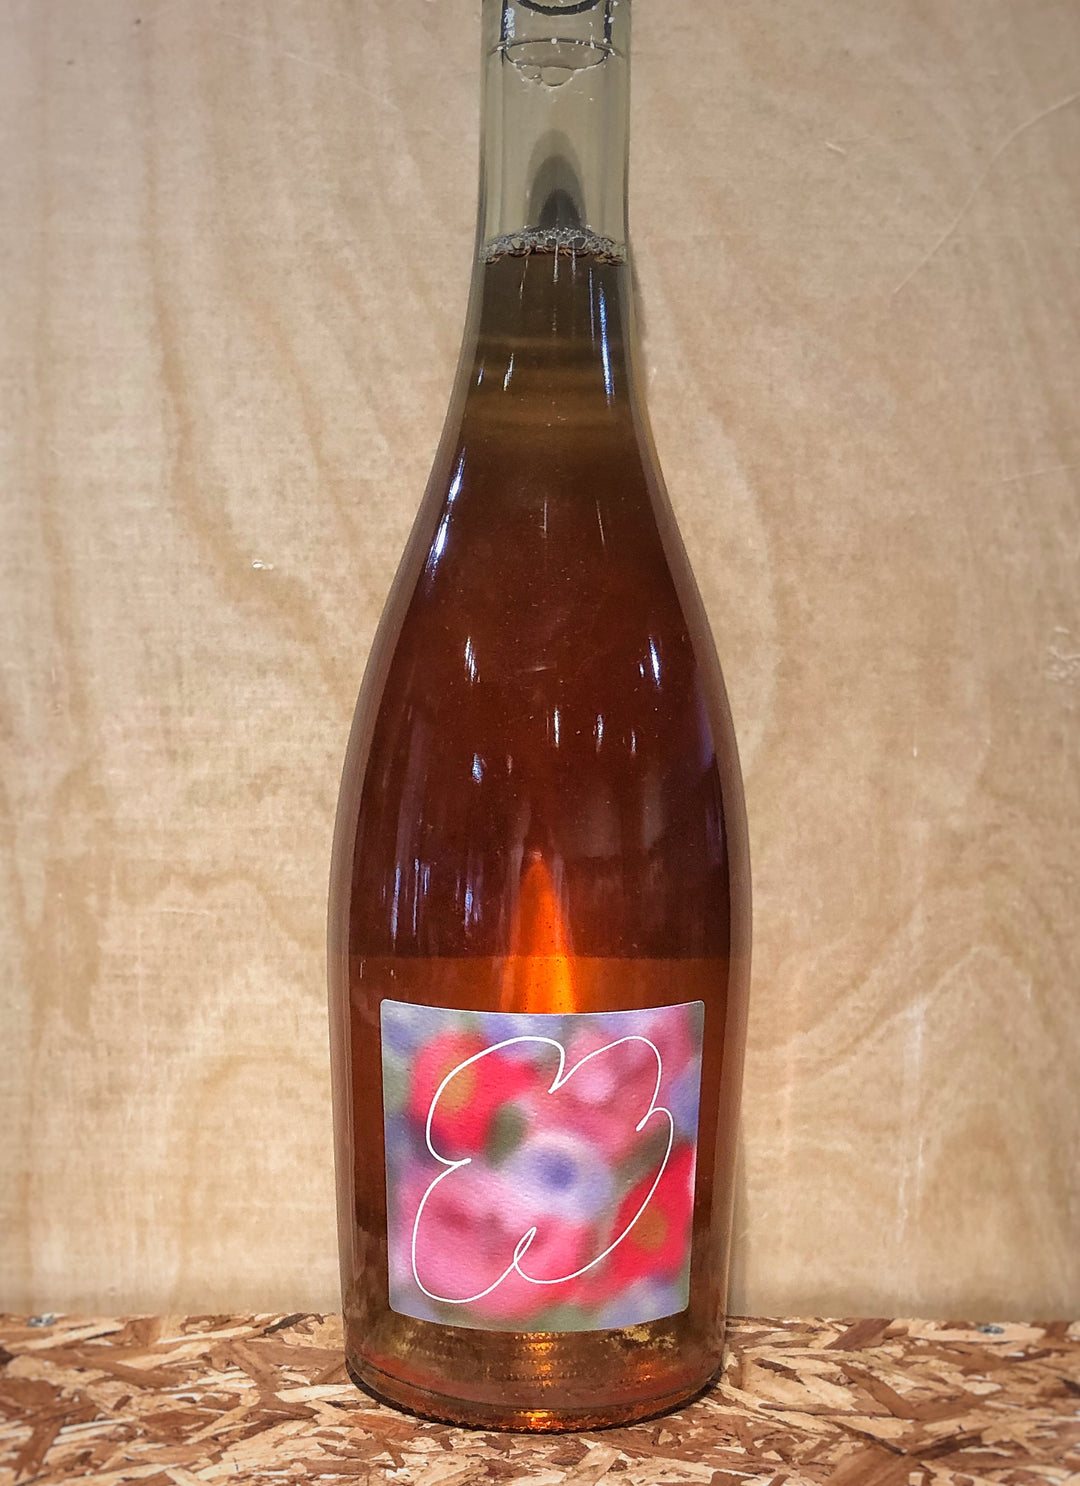 Revel Cider 'Pom Lam' Blend of Tannic Perry with Aged Hops & Hyslop Cider (Ontario, Canada)